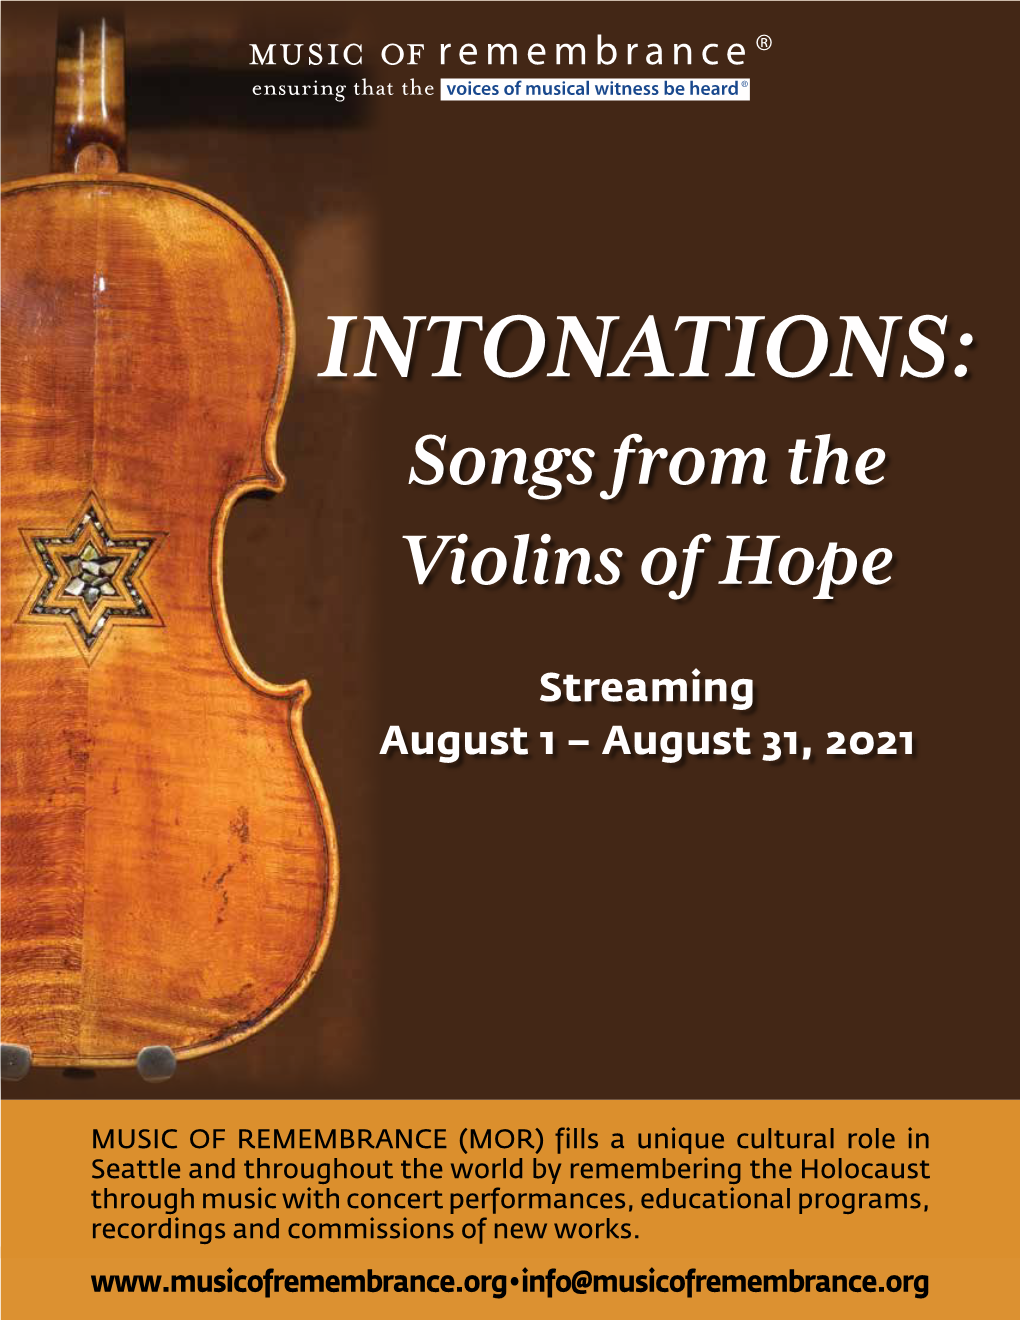 INTONATIONS: Songs from the Violins of Hope